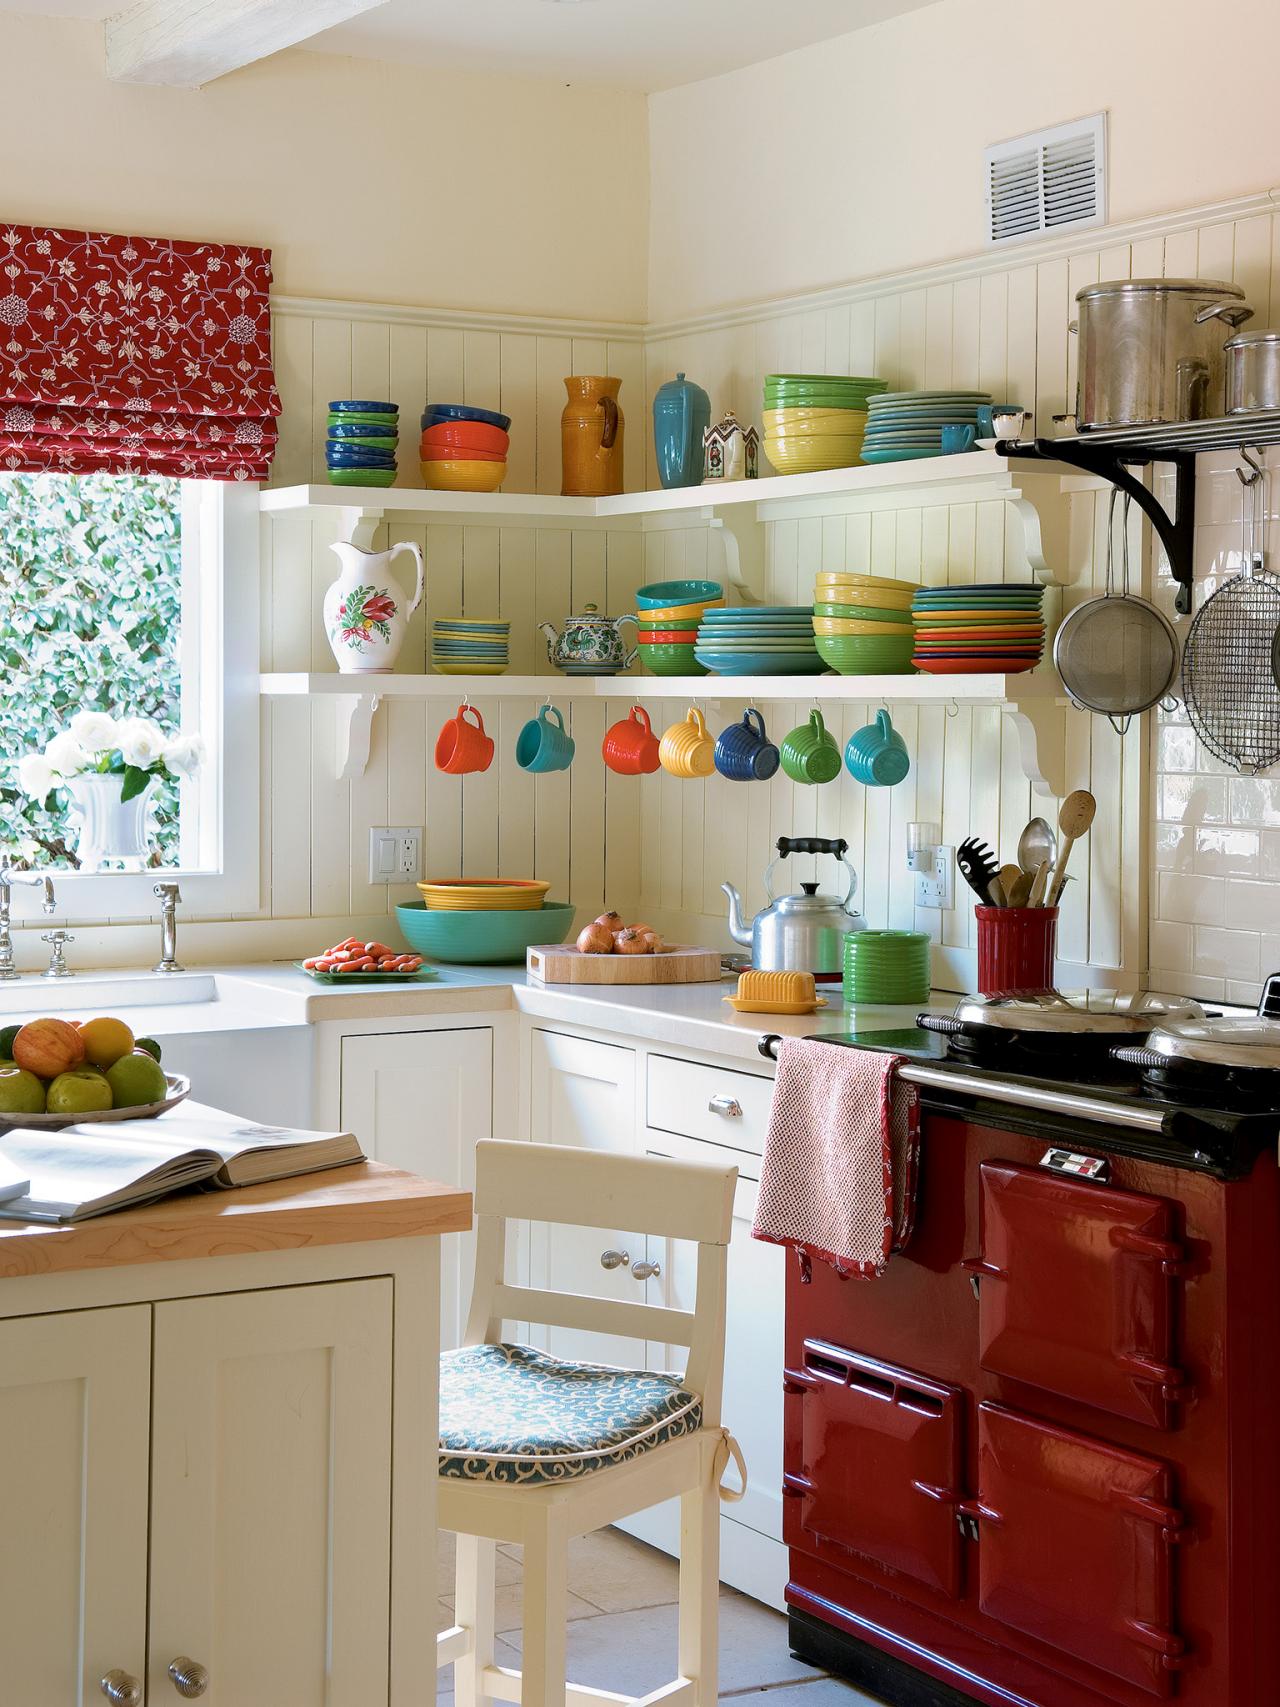 18 Best Small Kitchen Ideas and Designs that are Stylish in 18